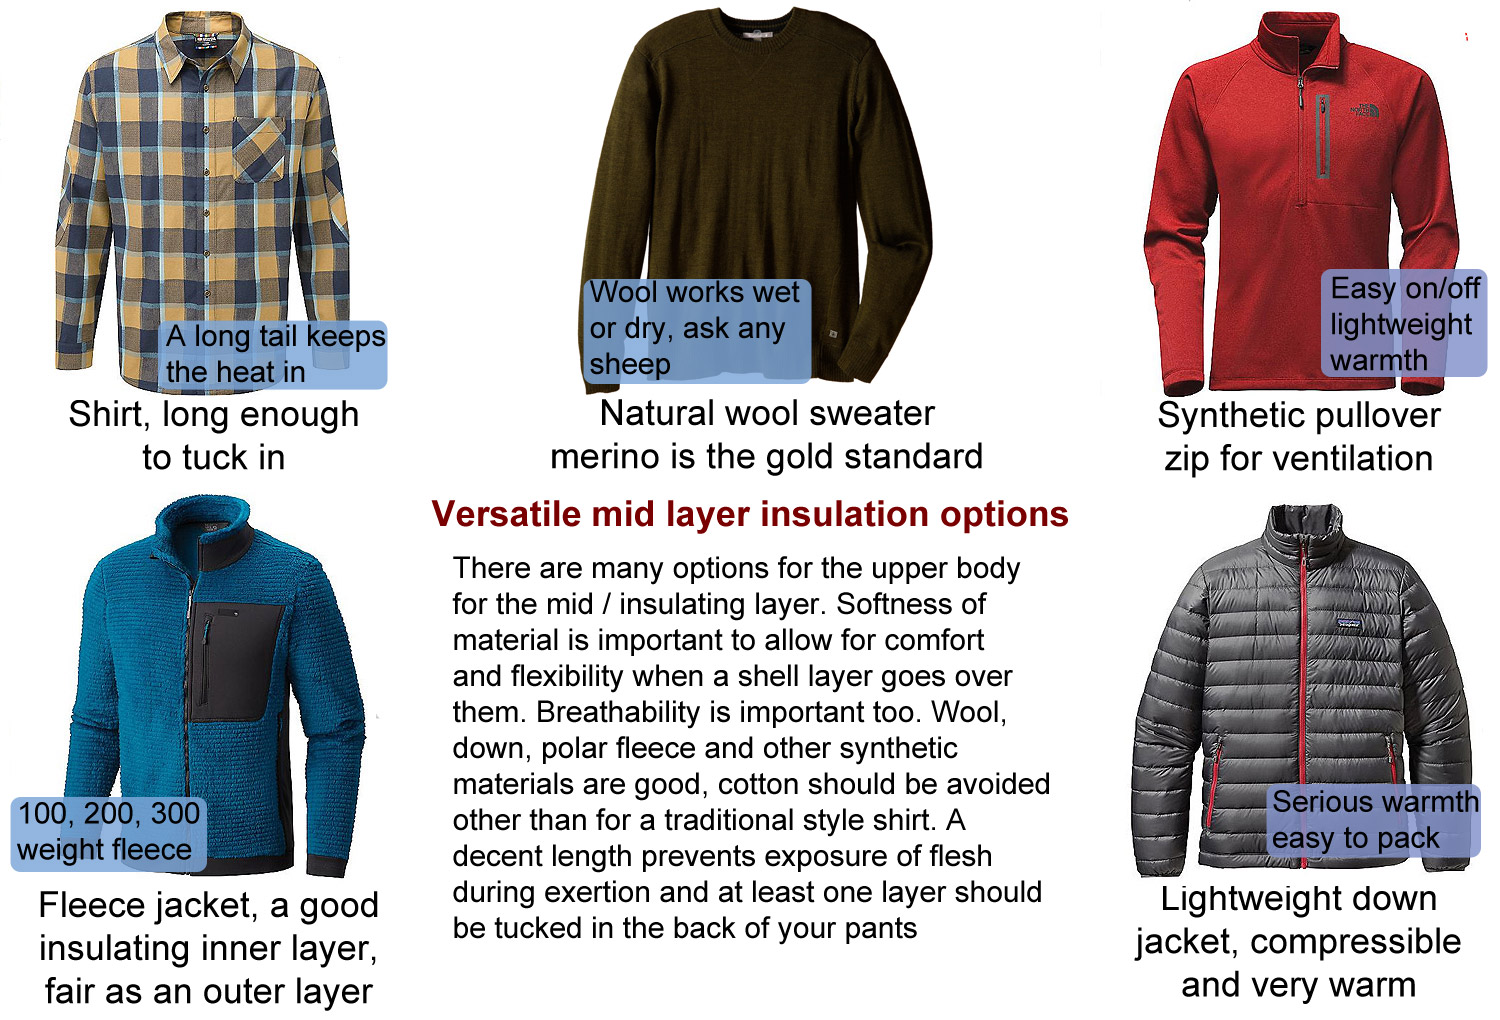 Winter shirts, pullovers, fleeces and jackets for cold weather layering ...